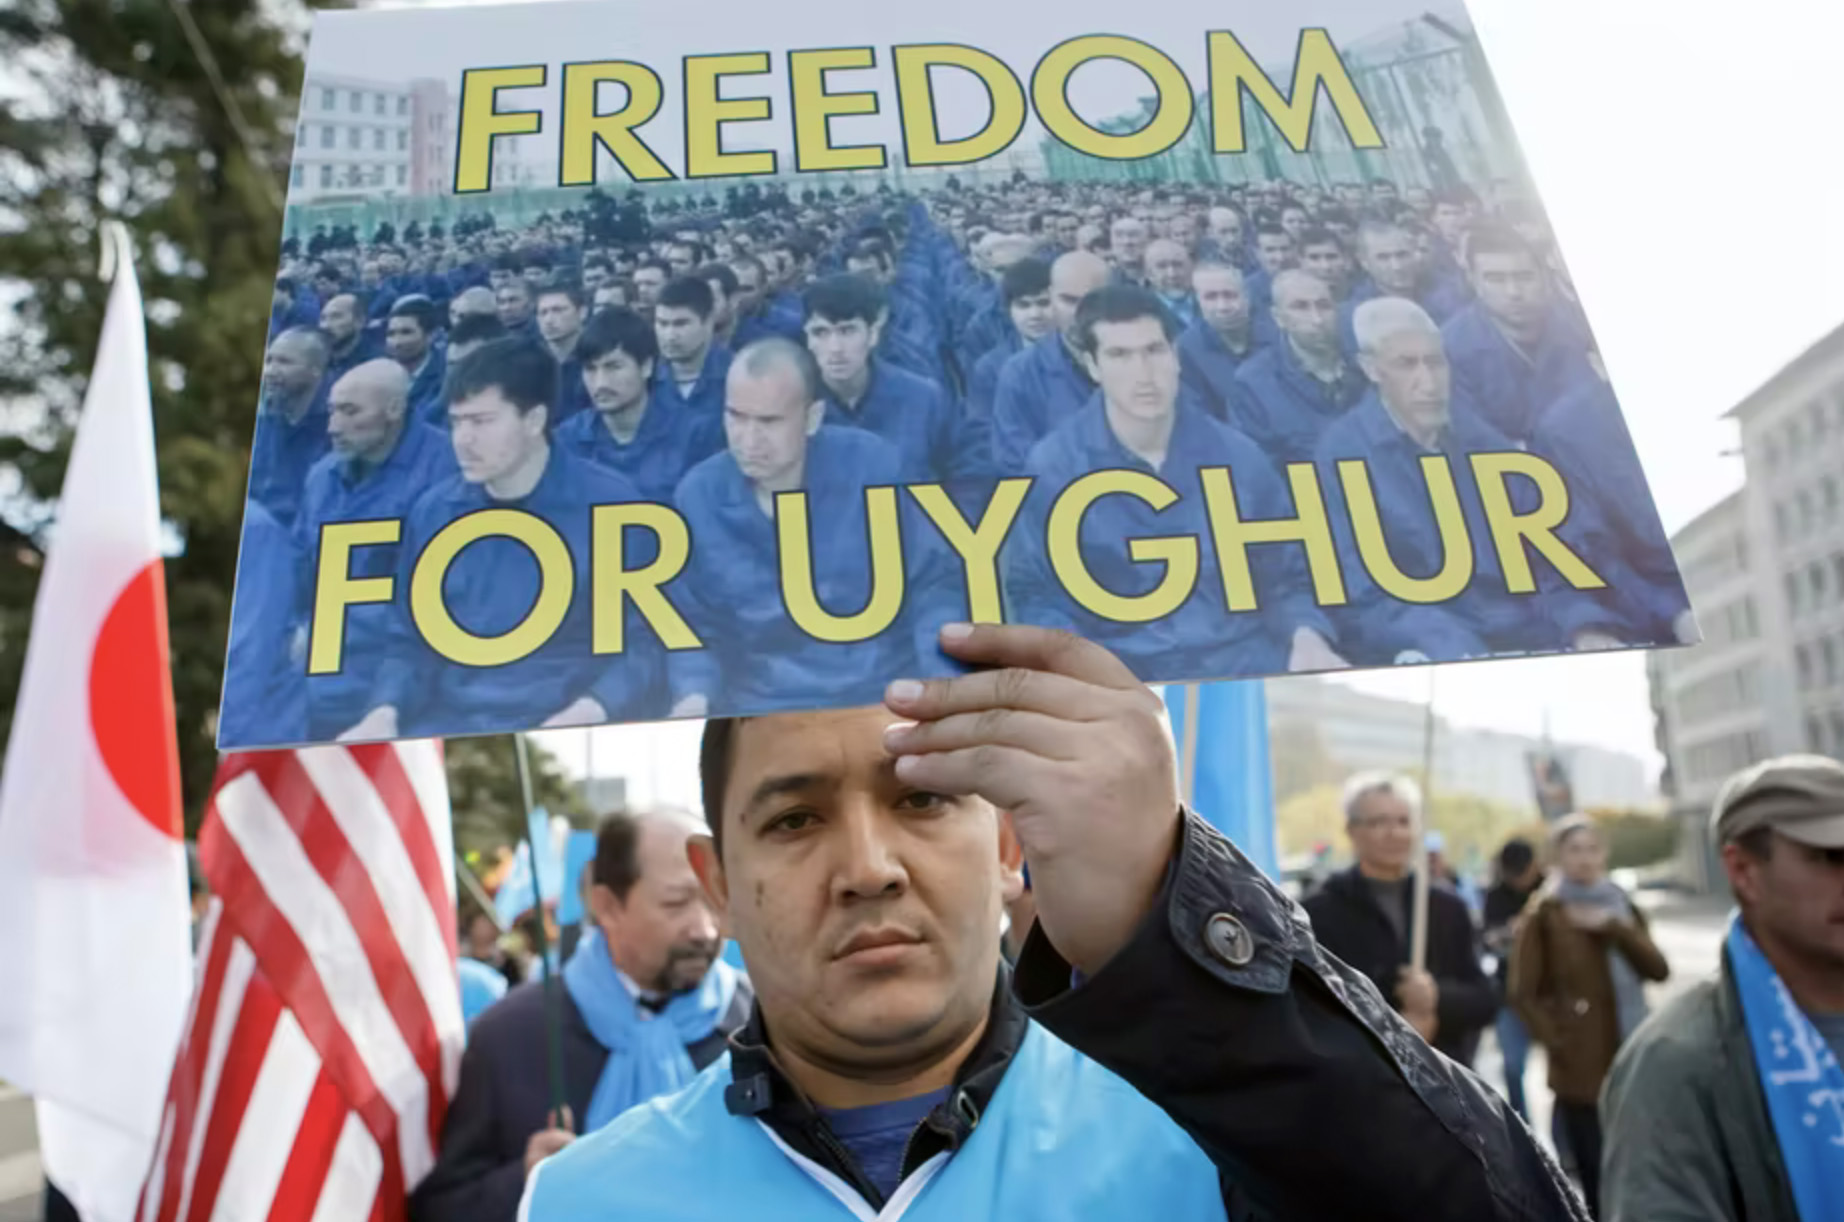 Man at protest holds up a "Freedom for Uyghurs" sign